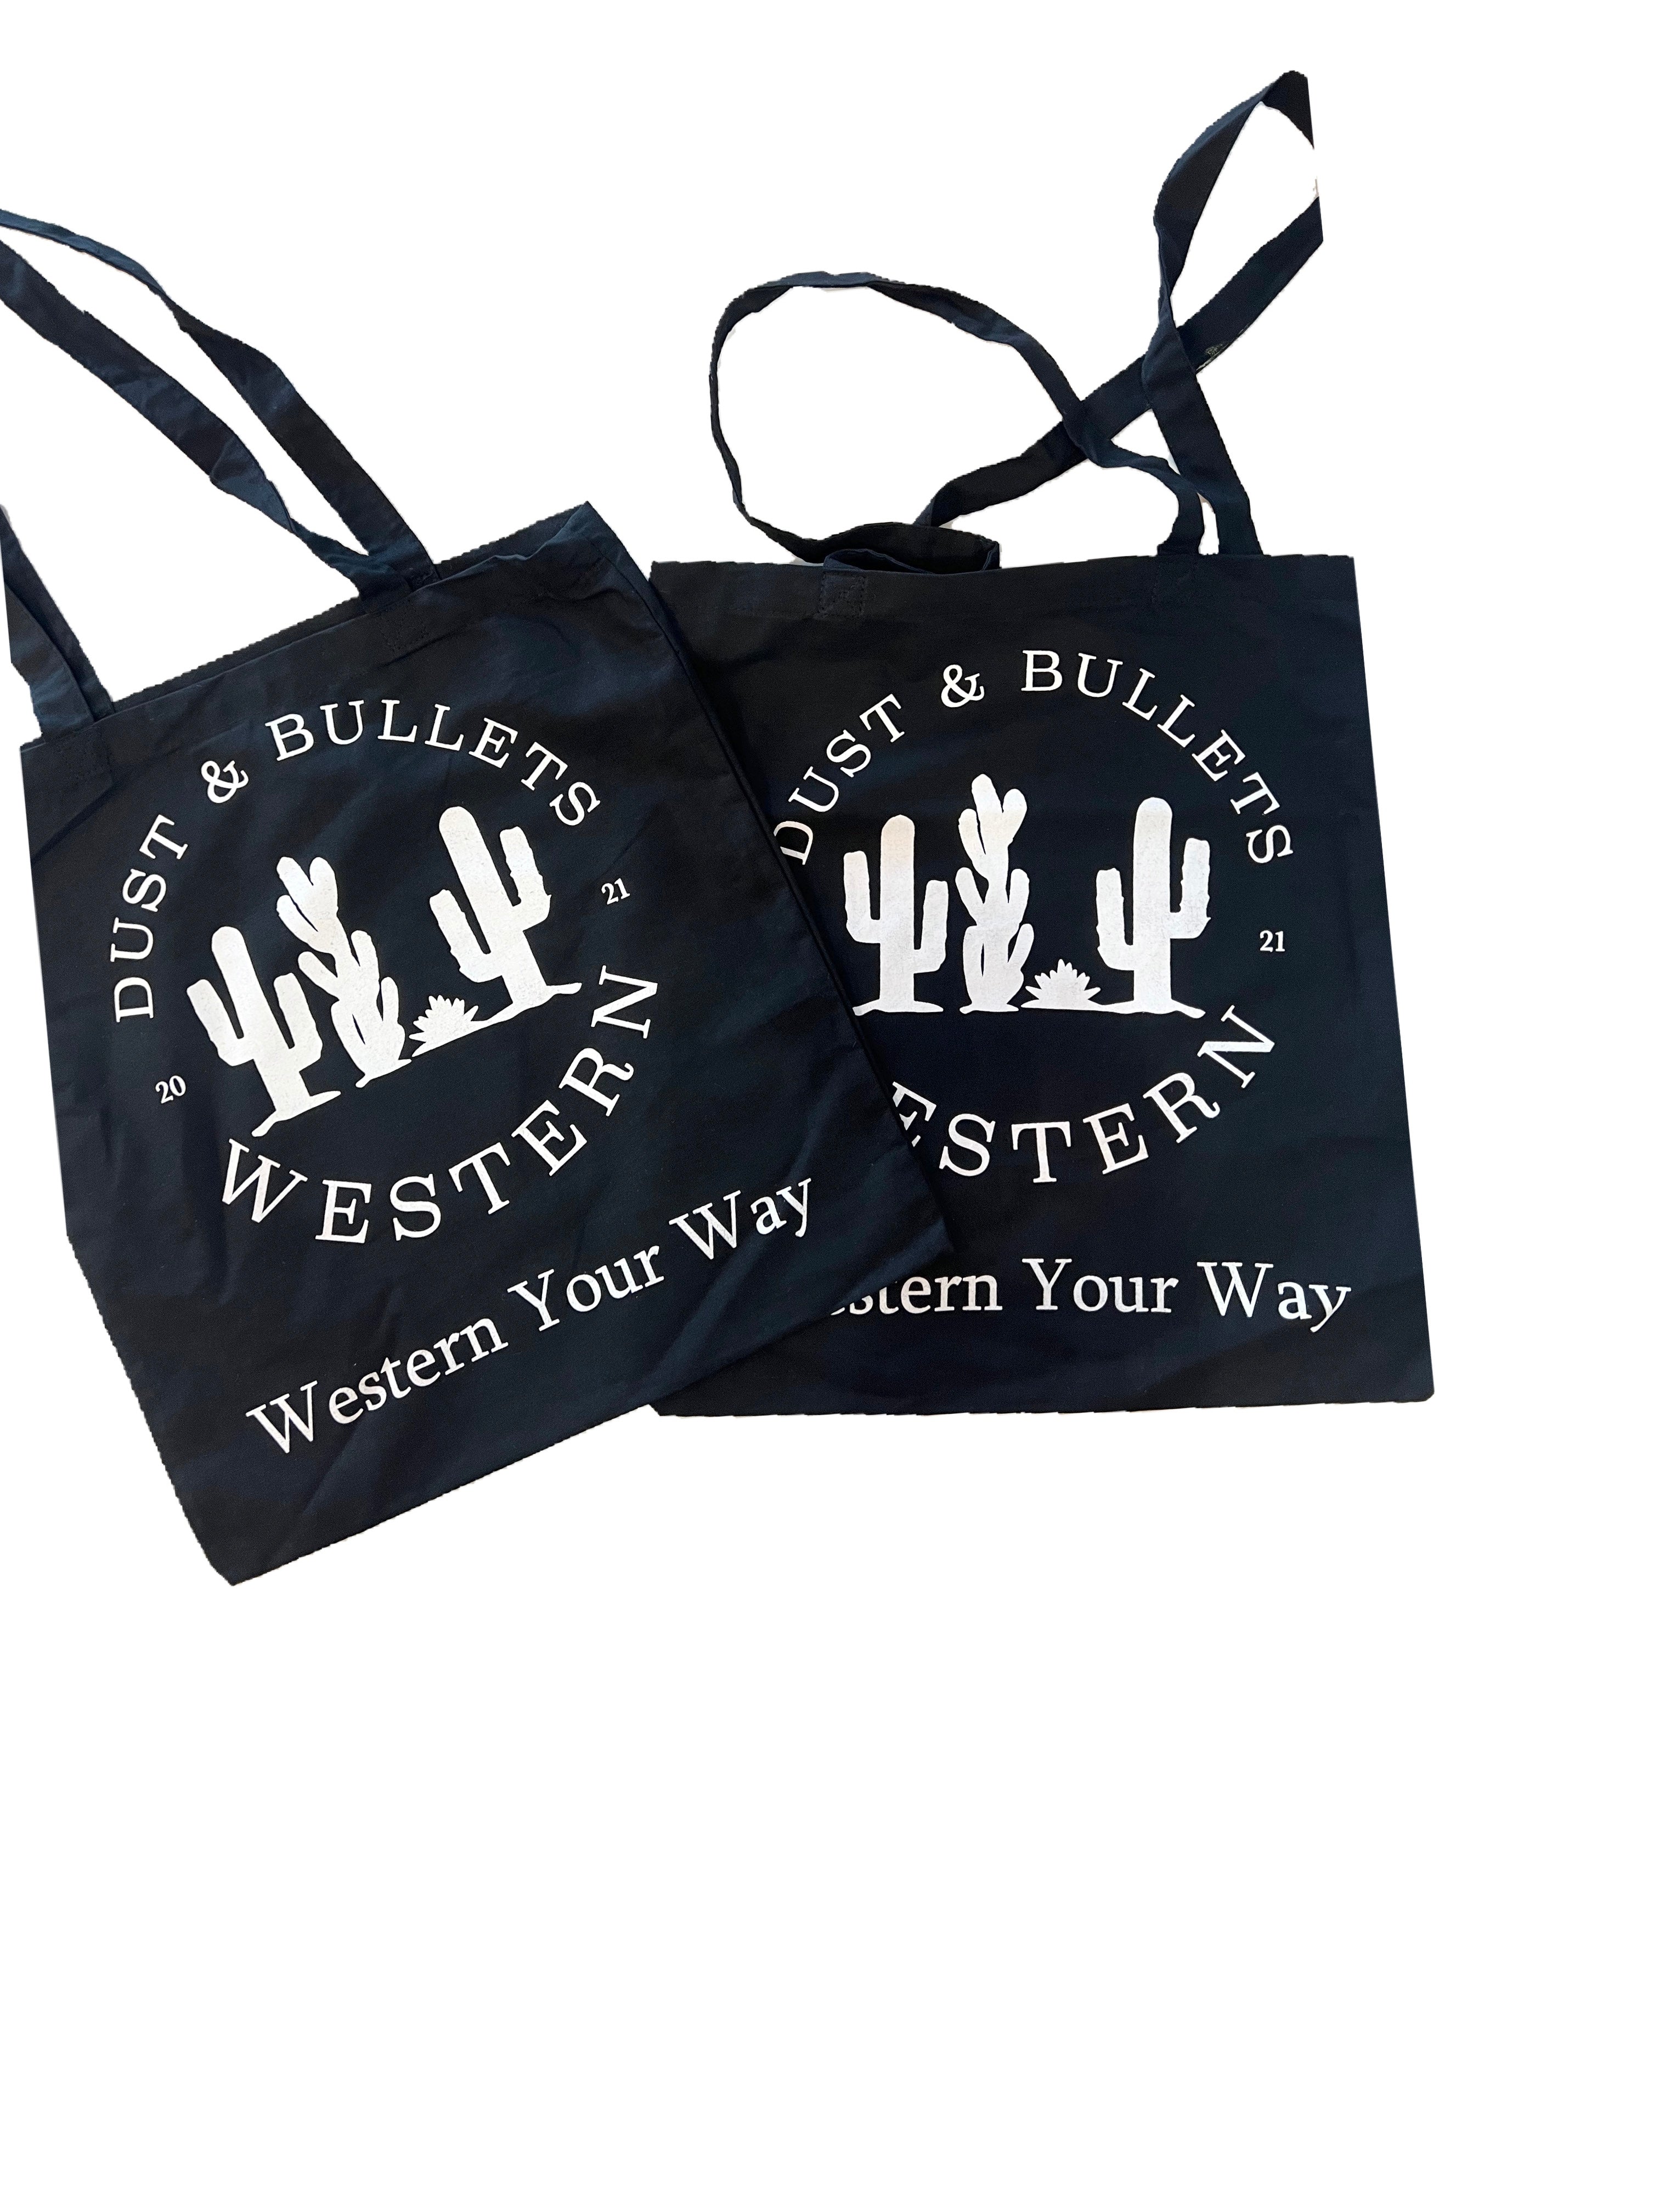 Dust and Bullets Western Tote Bag